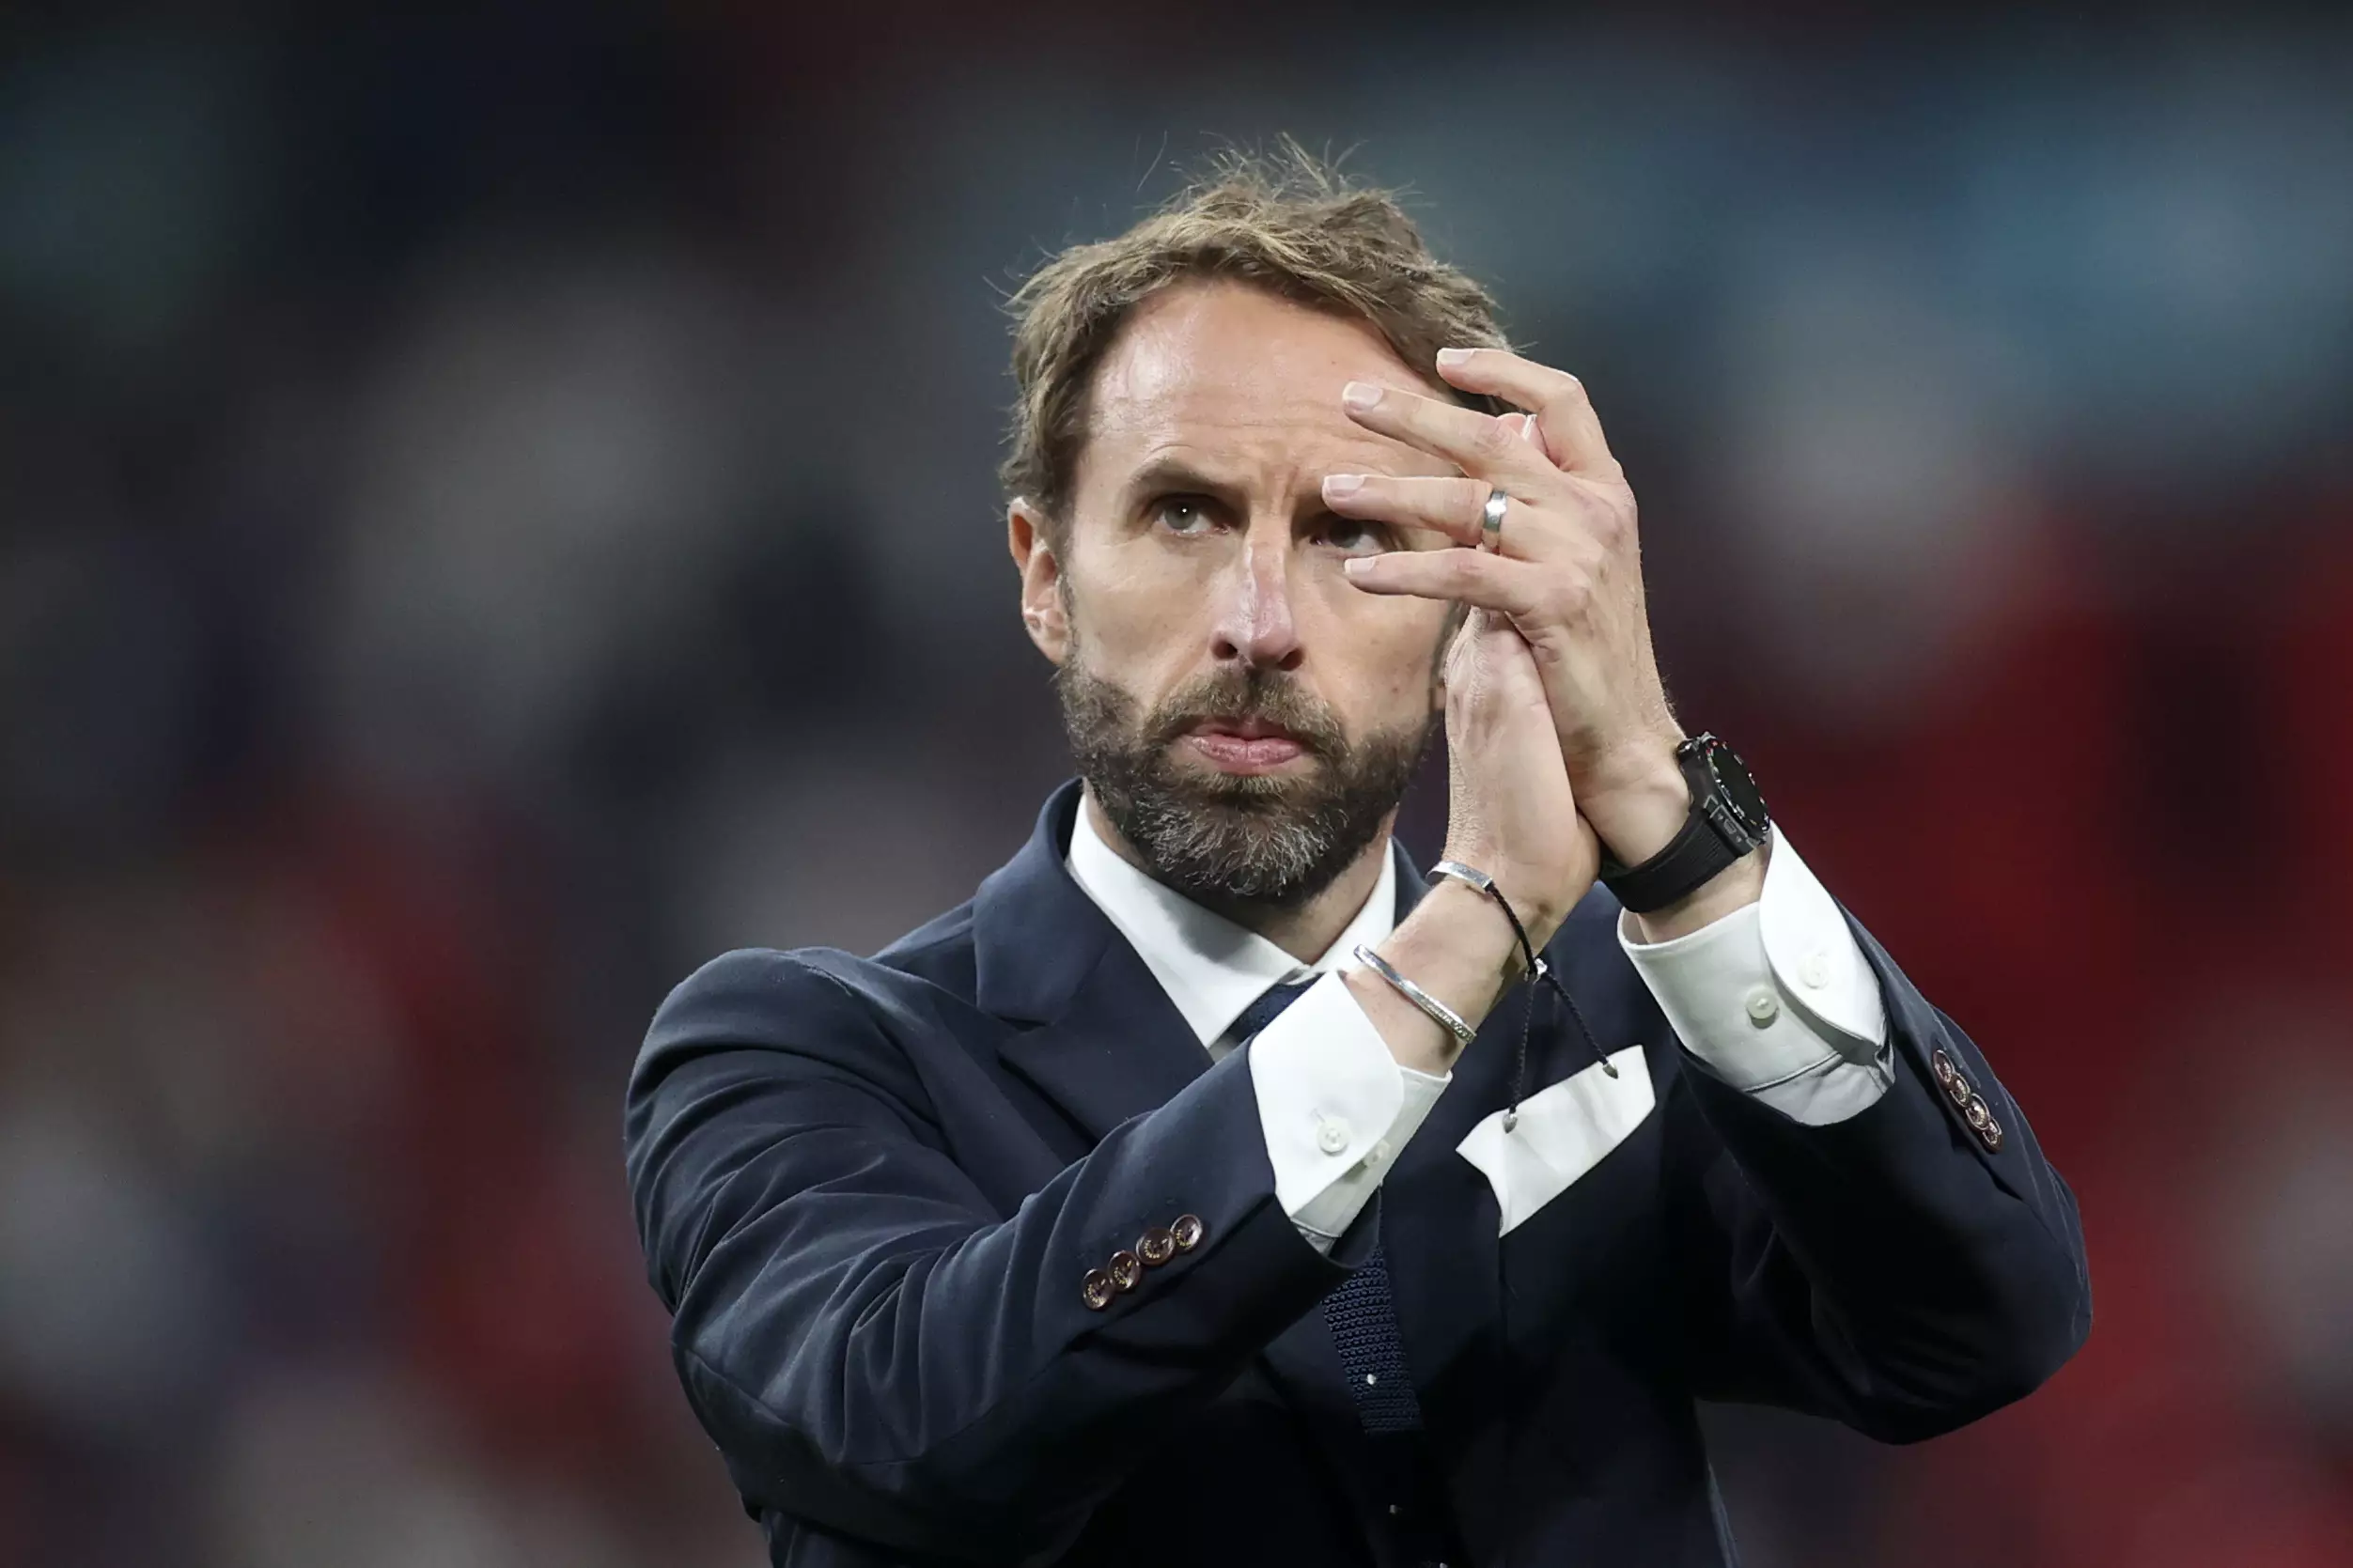 Gareth Southgate took responsibility for the defeat. (